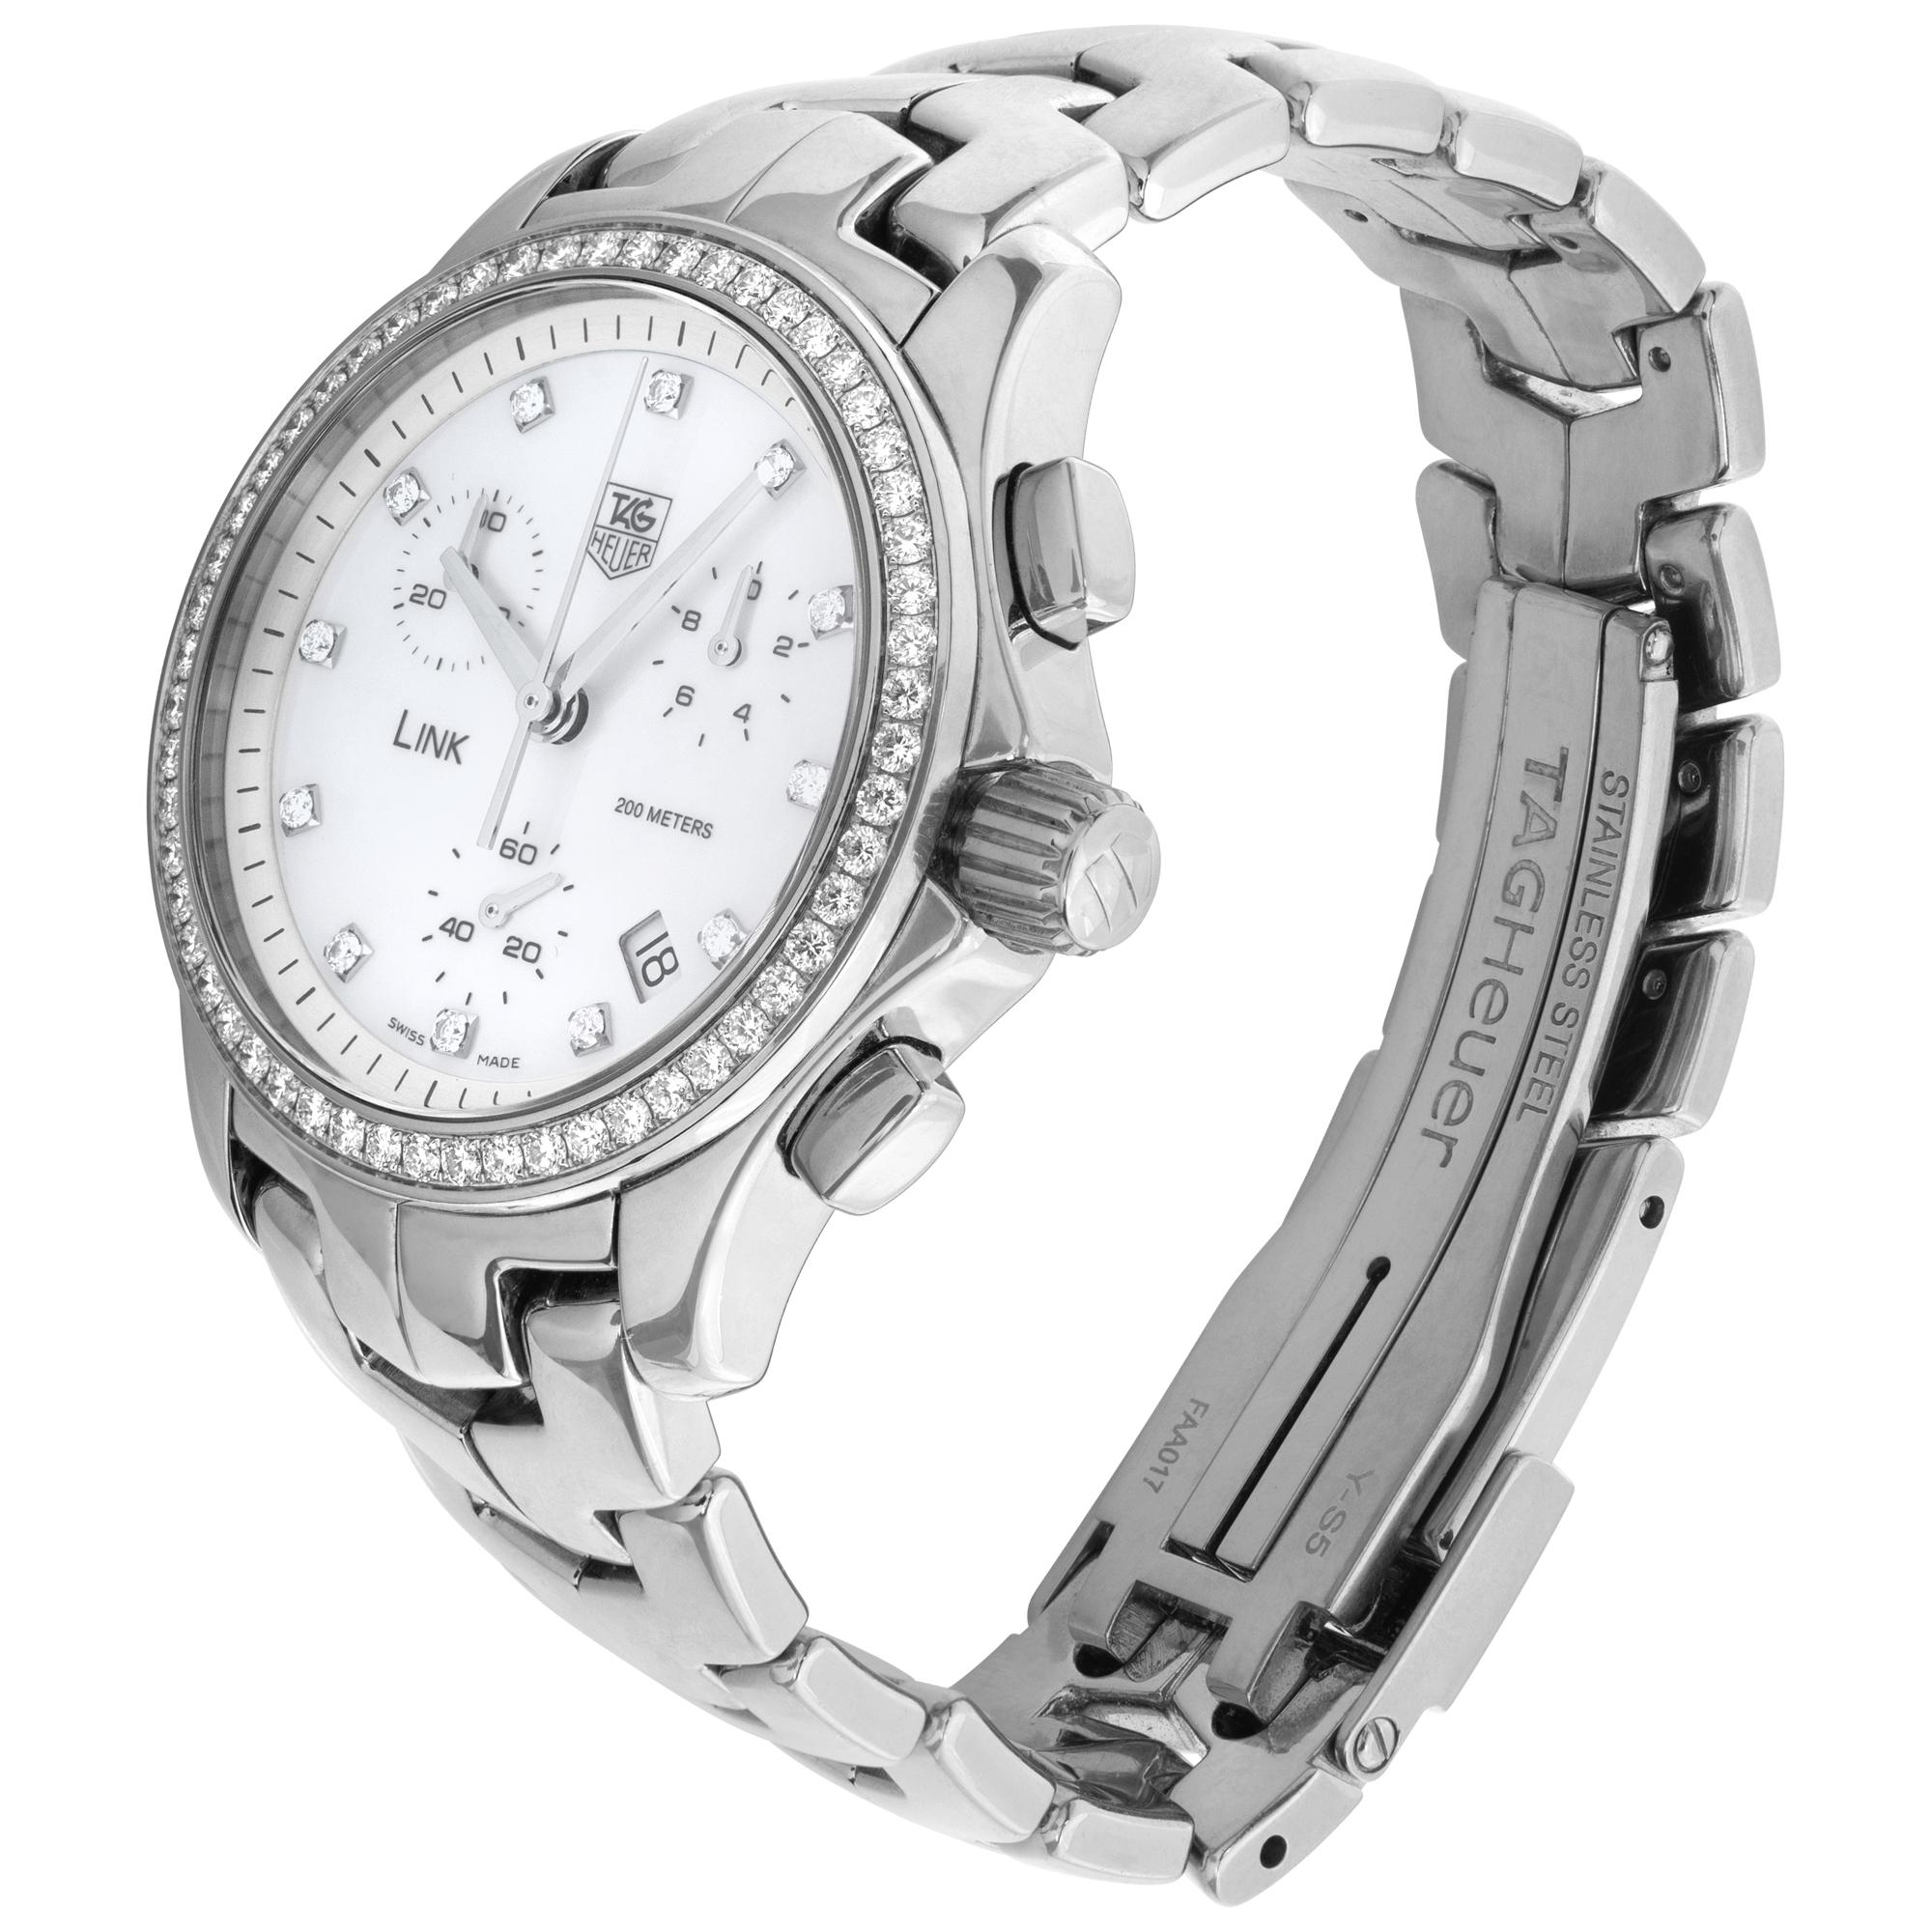 Tag Heuer Link Chronograph in stainless steel with an original diamond mother of pearl dial and diamond bezel. Quartz w/ subseconds, date and chronograph. 33 mm case size. Ref CJF1314. Fine Pre-owned Tag Heuer Watch.

 Certified preowned Sport Tag